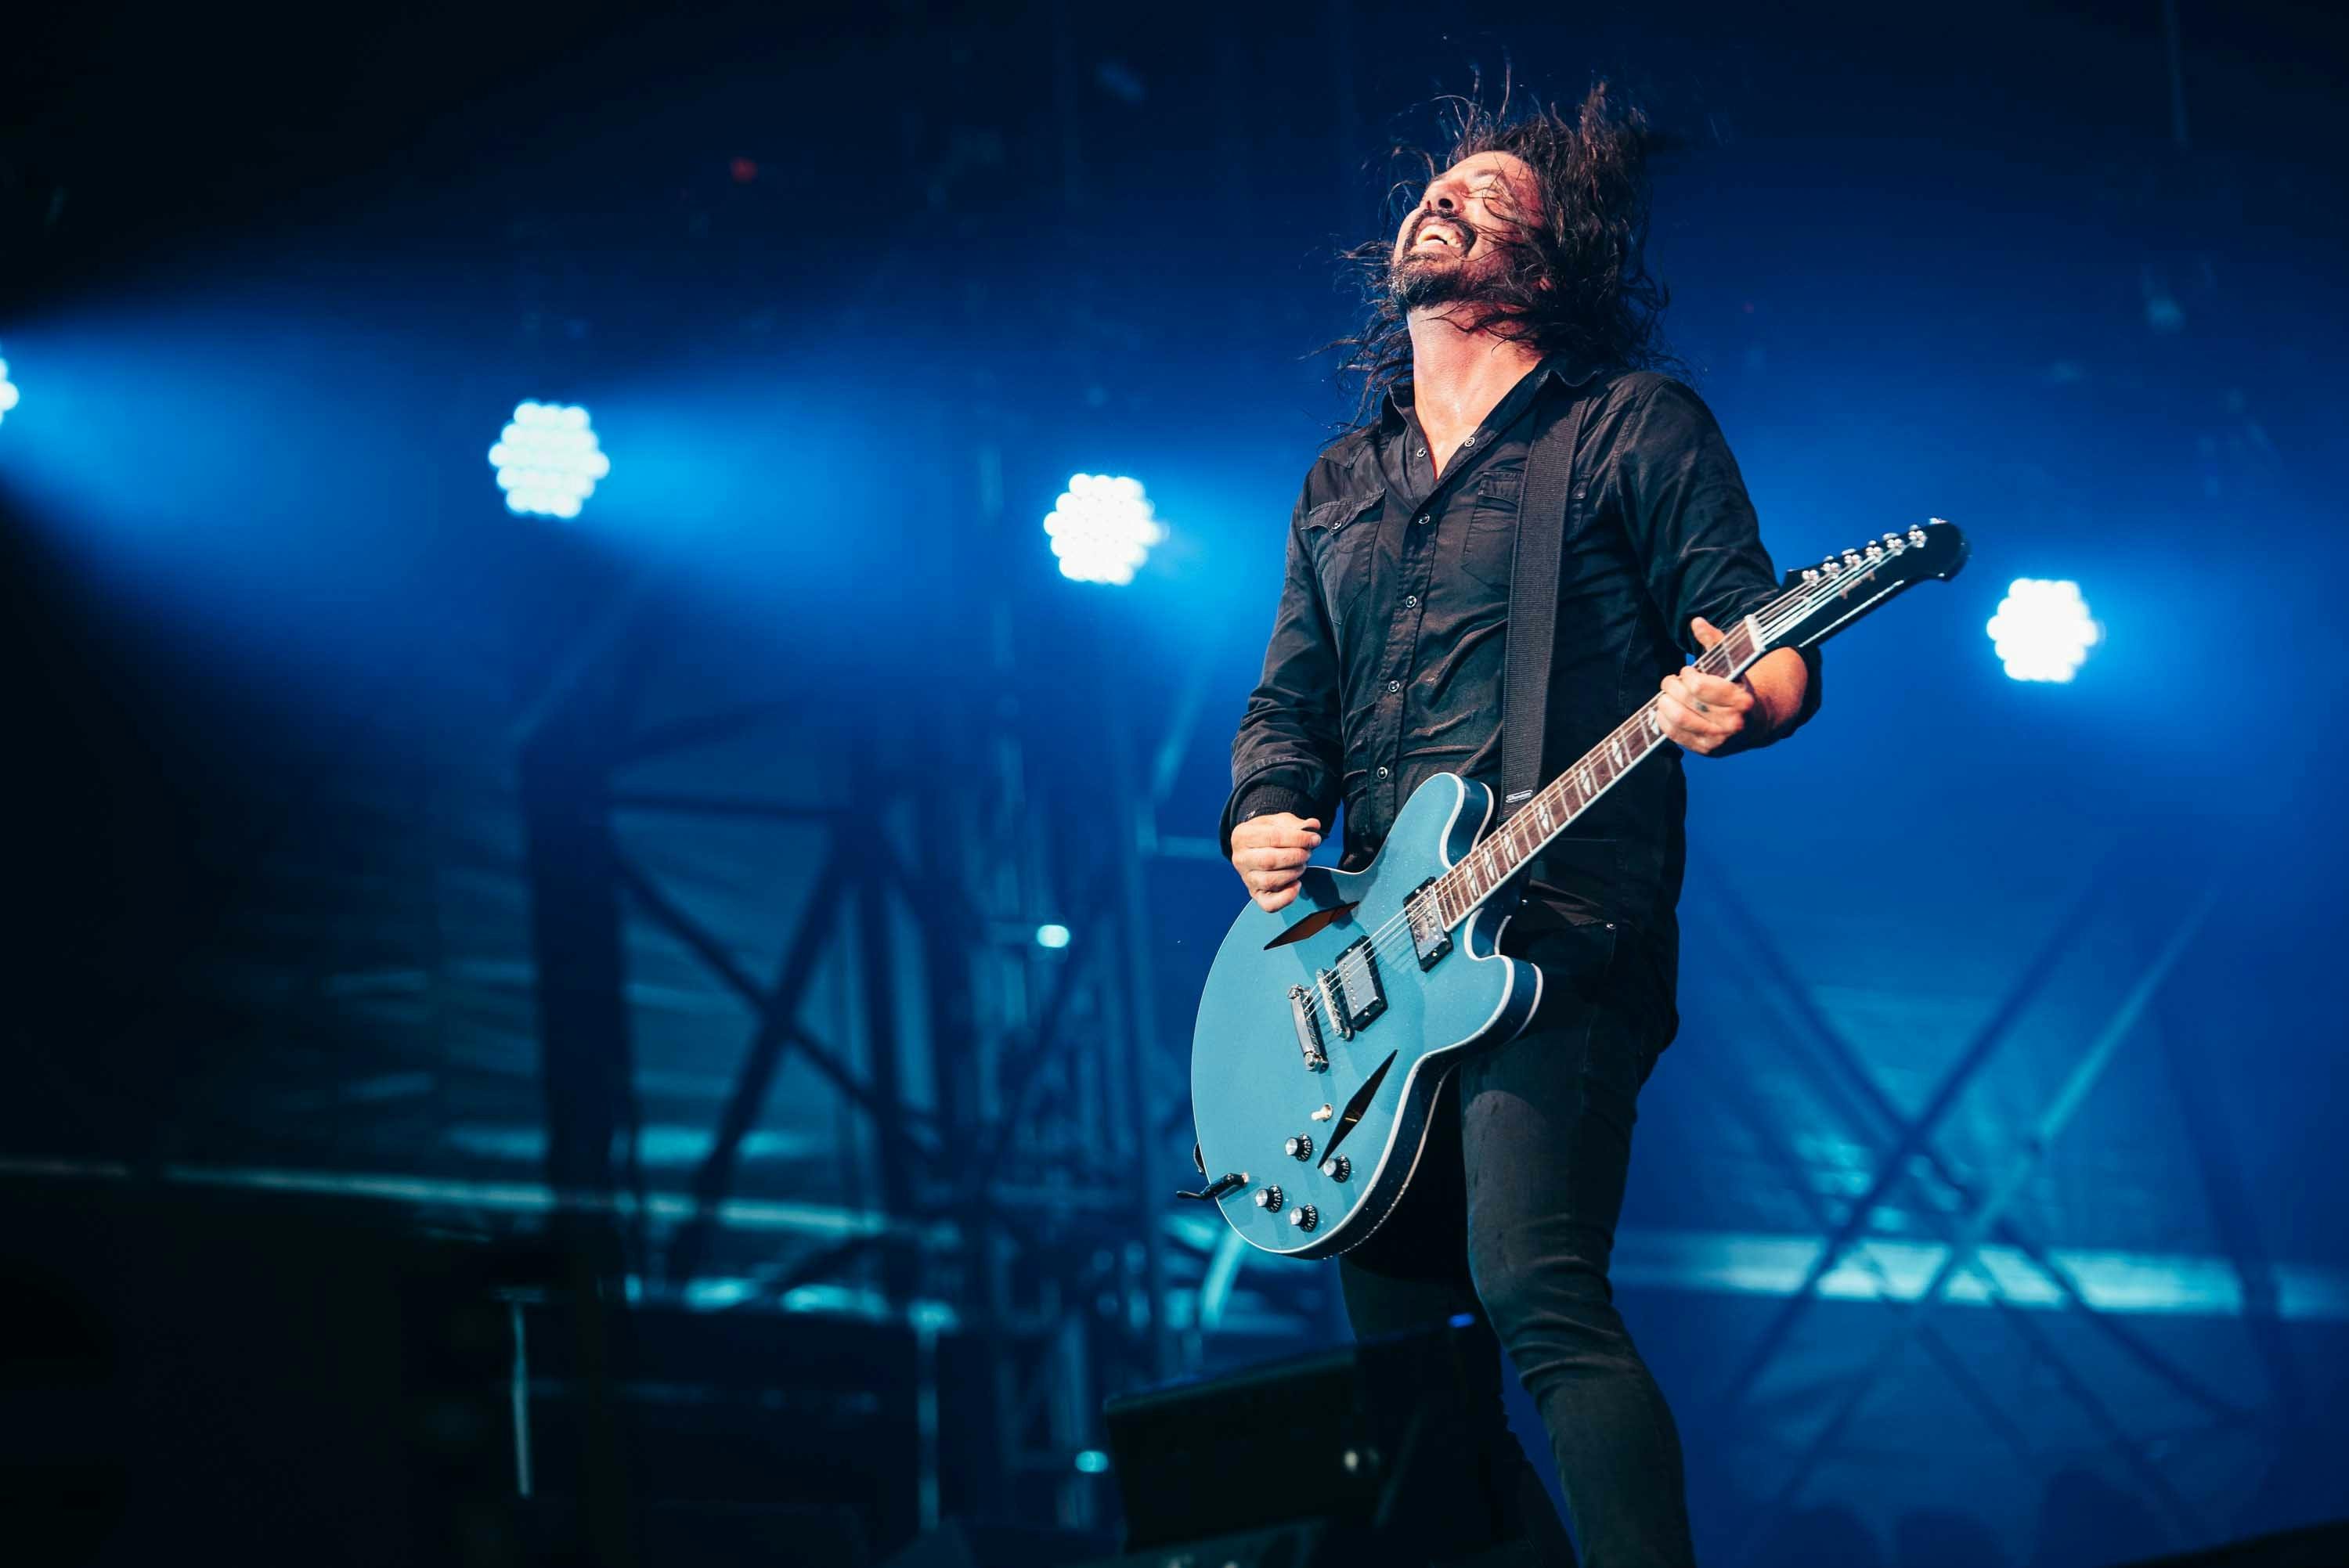 Dave Grohl On Debuting New Foos Material At Reading & Leeds: "There Is One New Song That Would F*cking Destroy…"